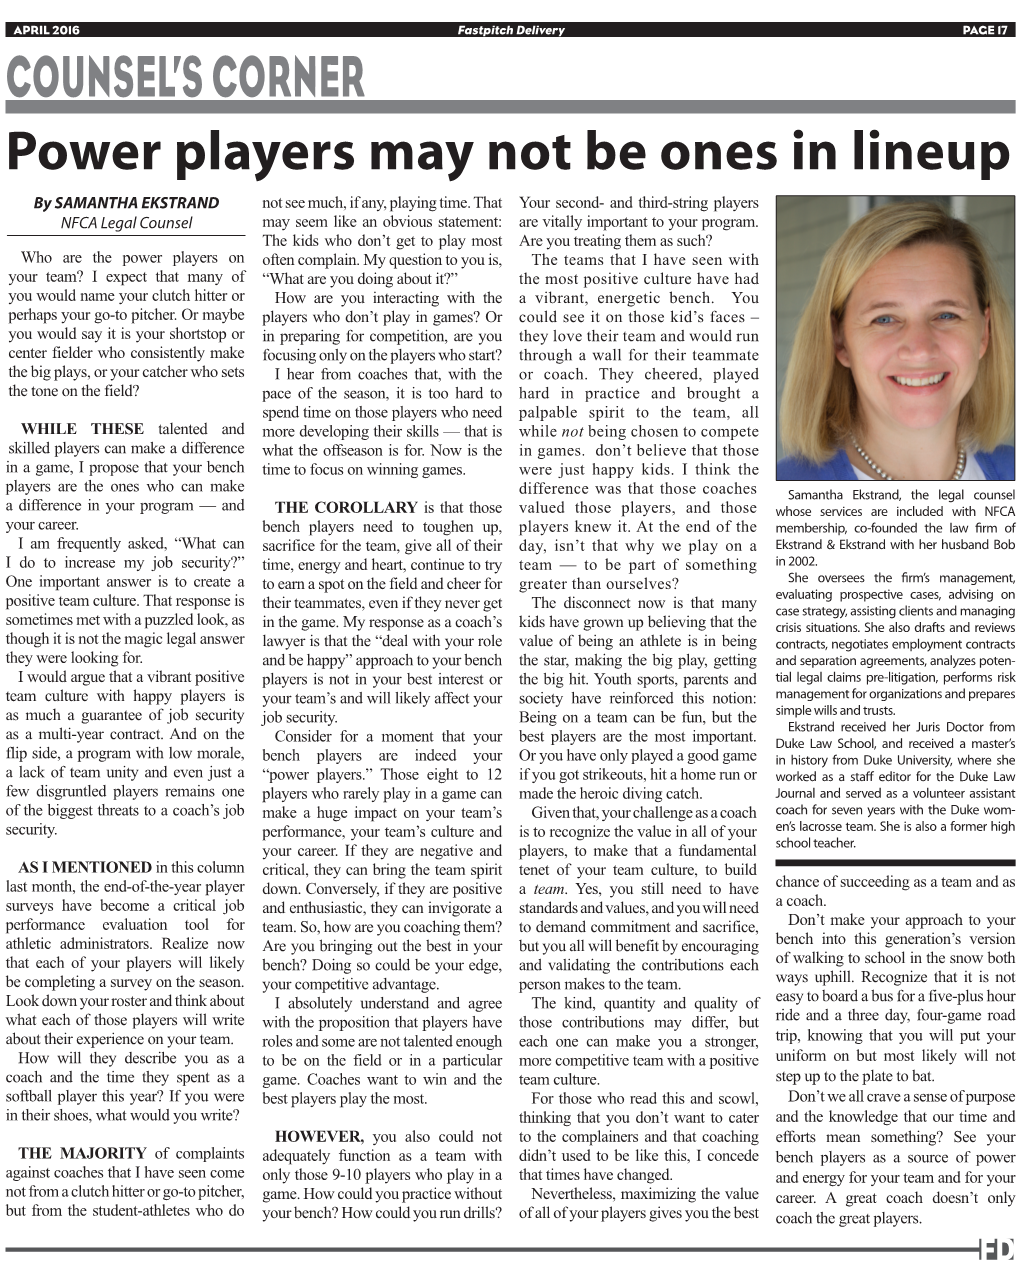 Power Players May Not Be Ones in Lineup by SAMANTHA EKSTRAND Not See Much, If Any, Playing Time